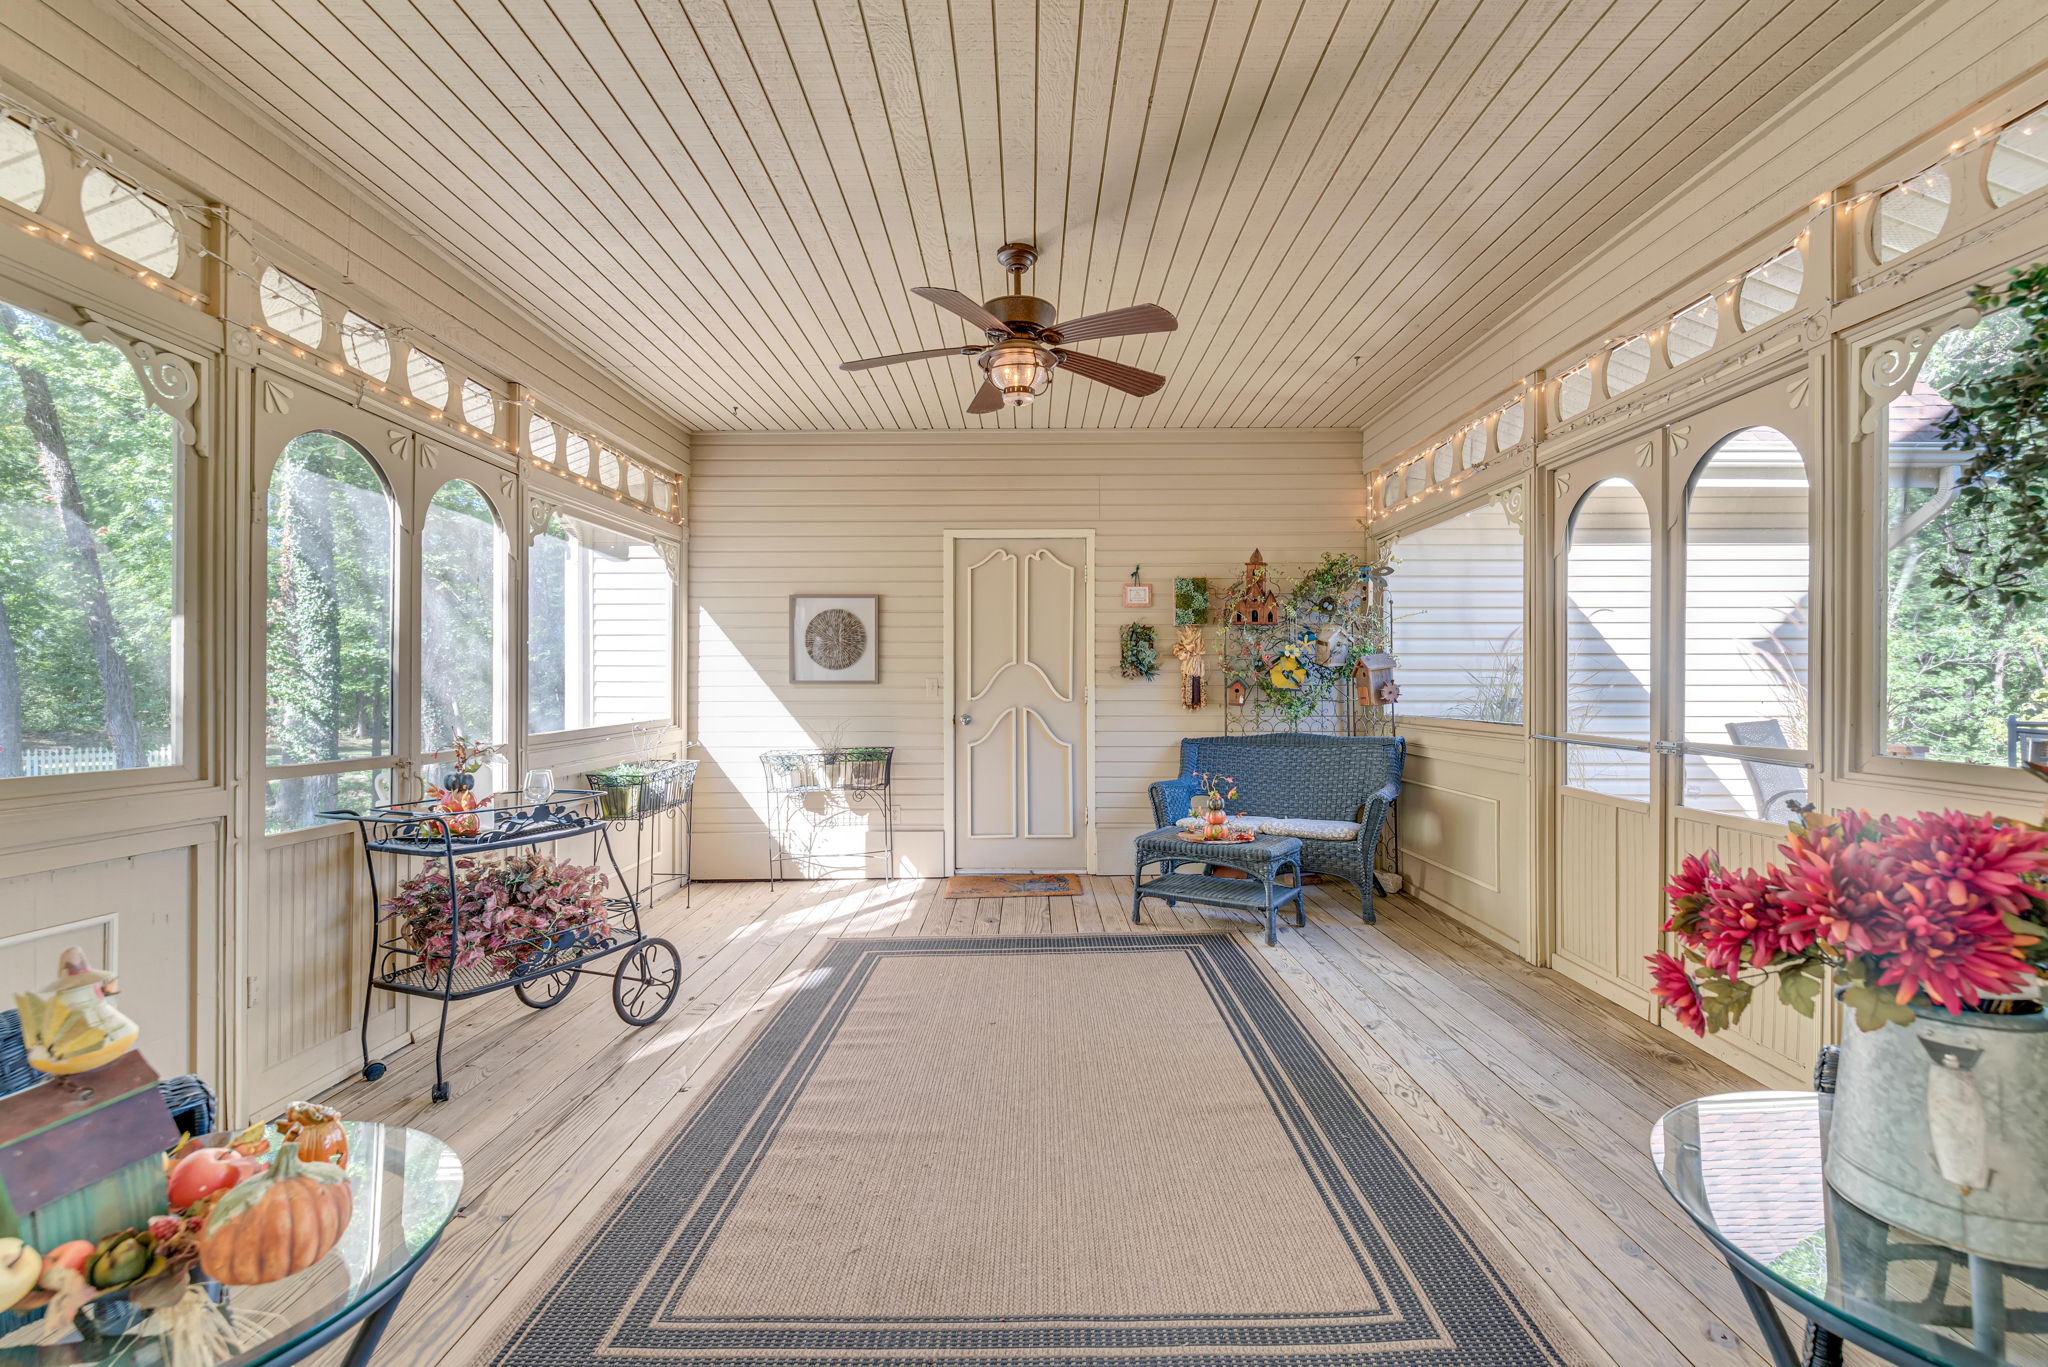 Breezeway to Garage just of kitchen Screened in with Ceiling fan and access to deck with views of the lake